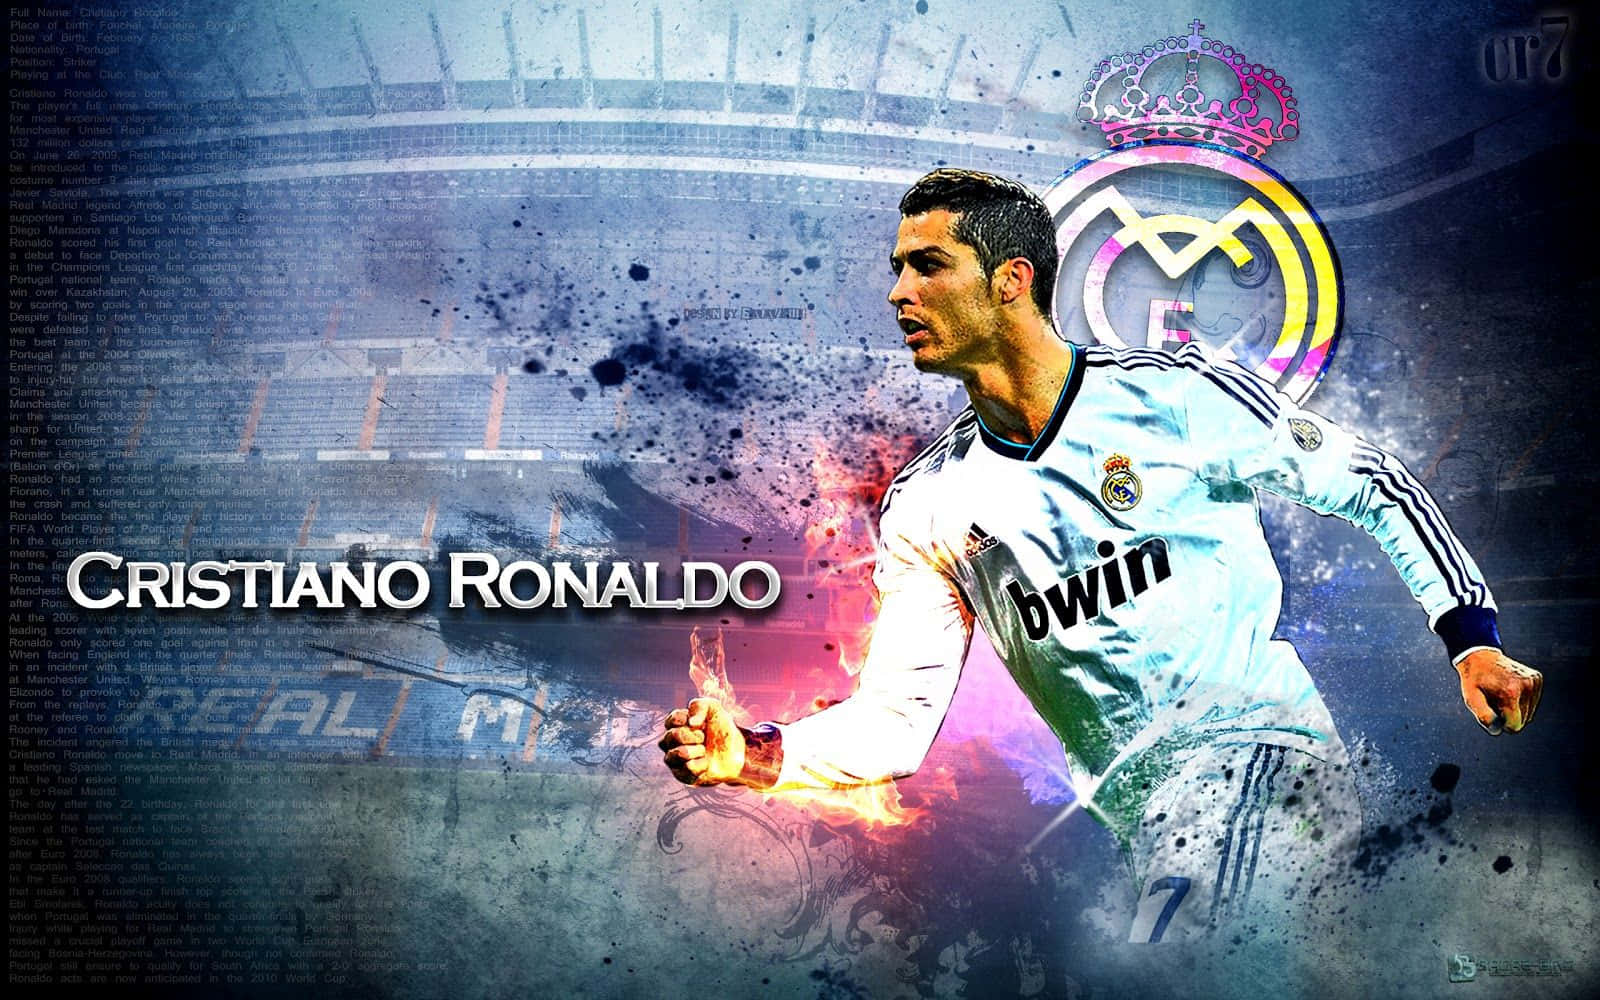 Cristiano Ronaldo scoring a goal with skillful footwork. Wallpaper